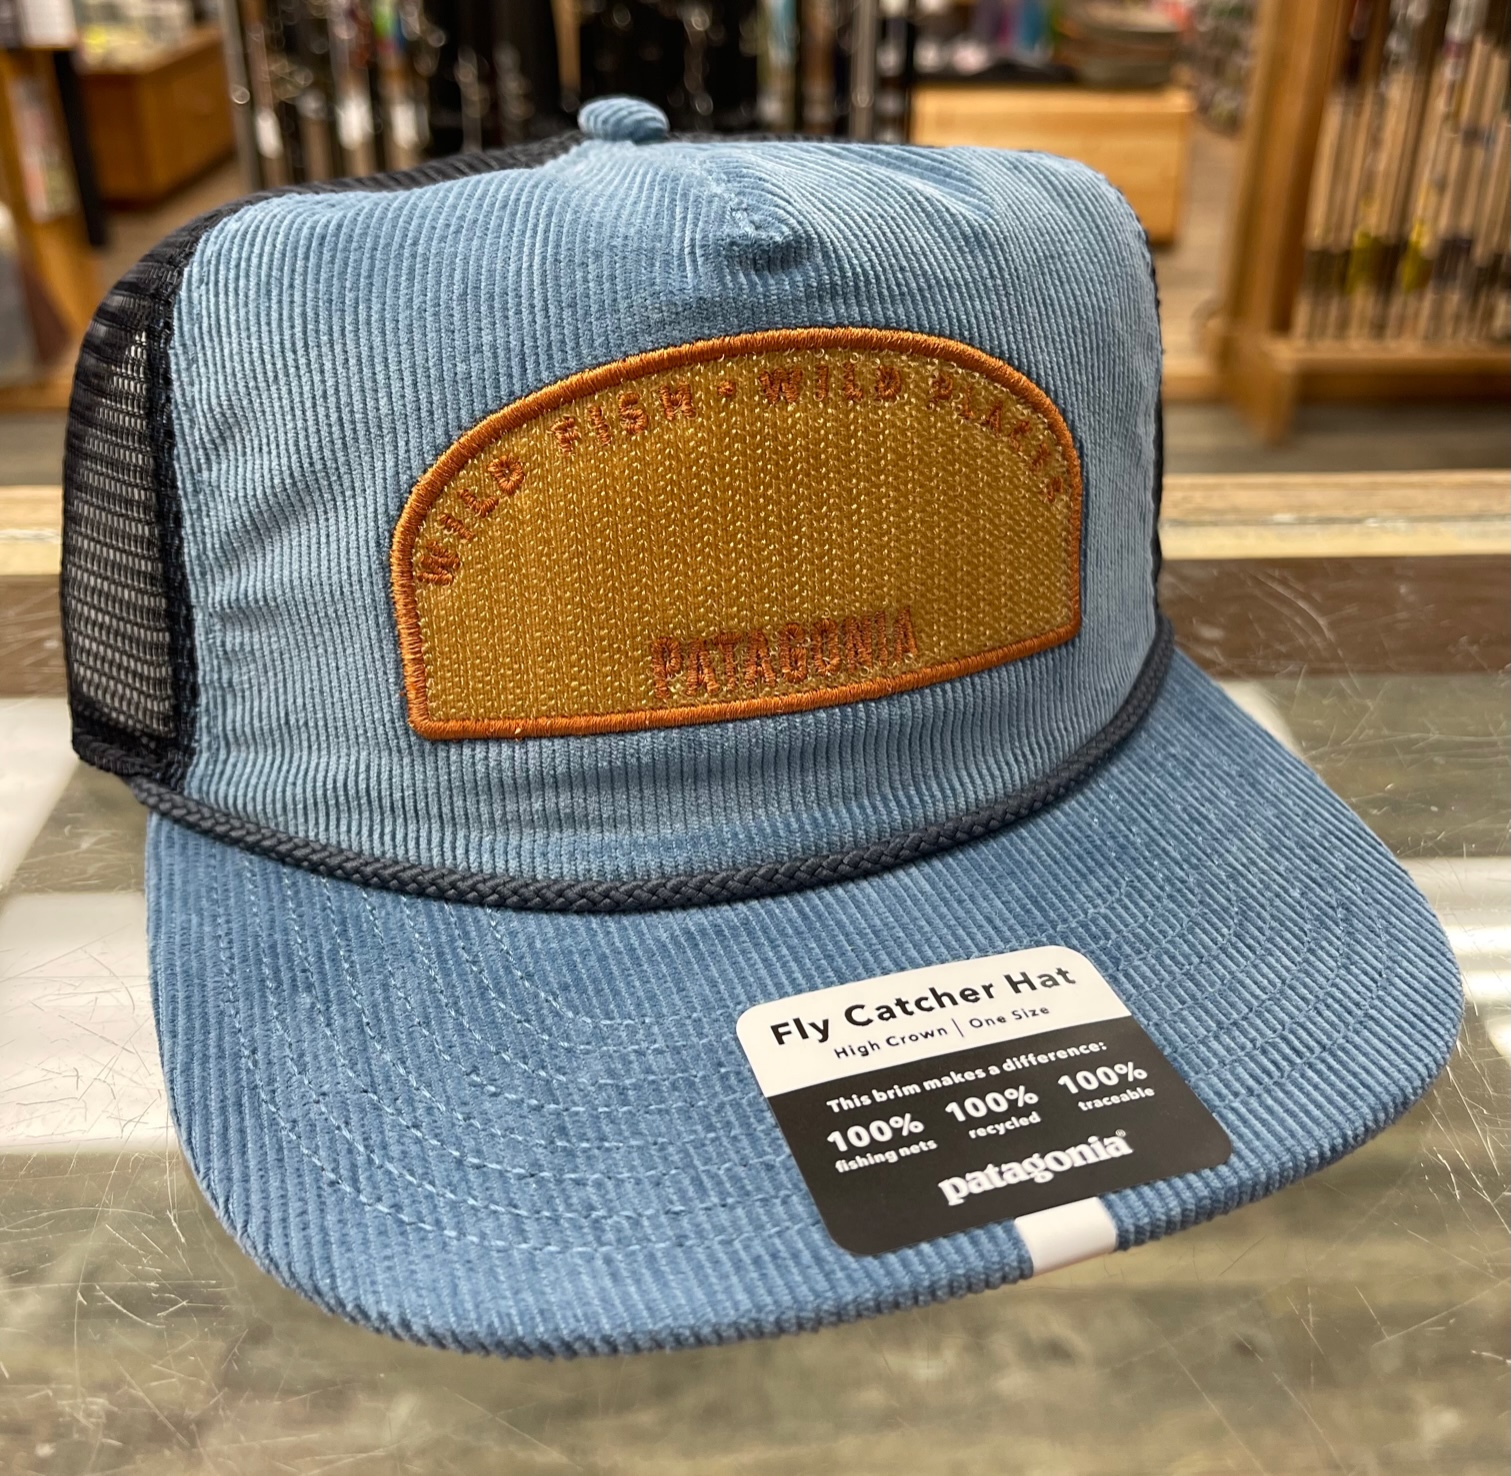 Patagonia Fly Catcher Hat Shop the vast assortment of Fly Fi